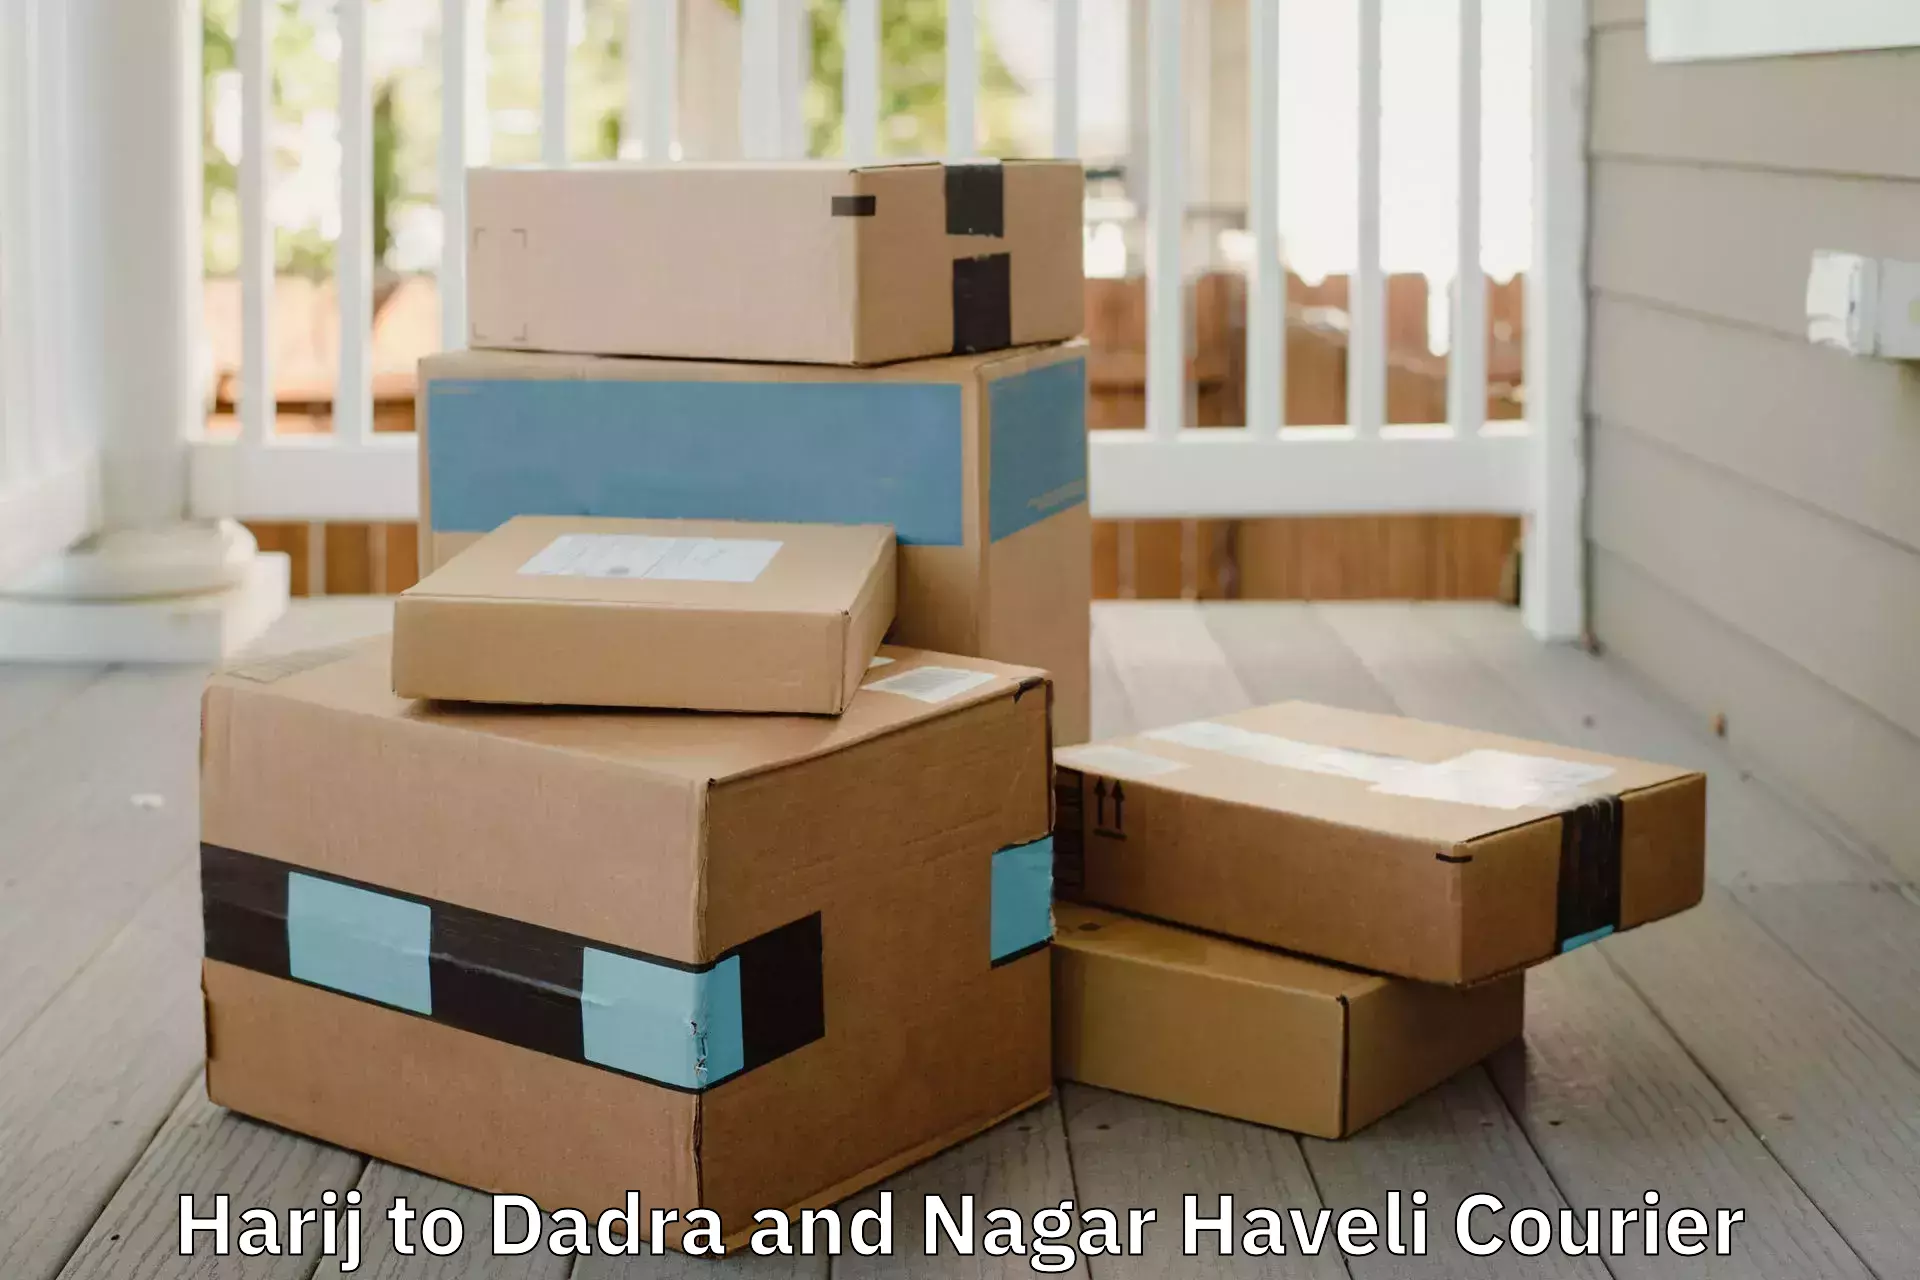 Professional home relocation in Harij to Dadra and Nagar Haveli